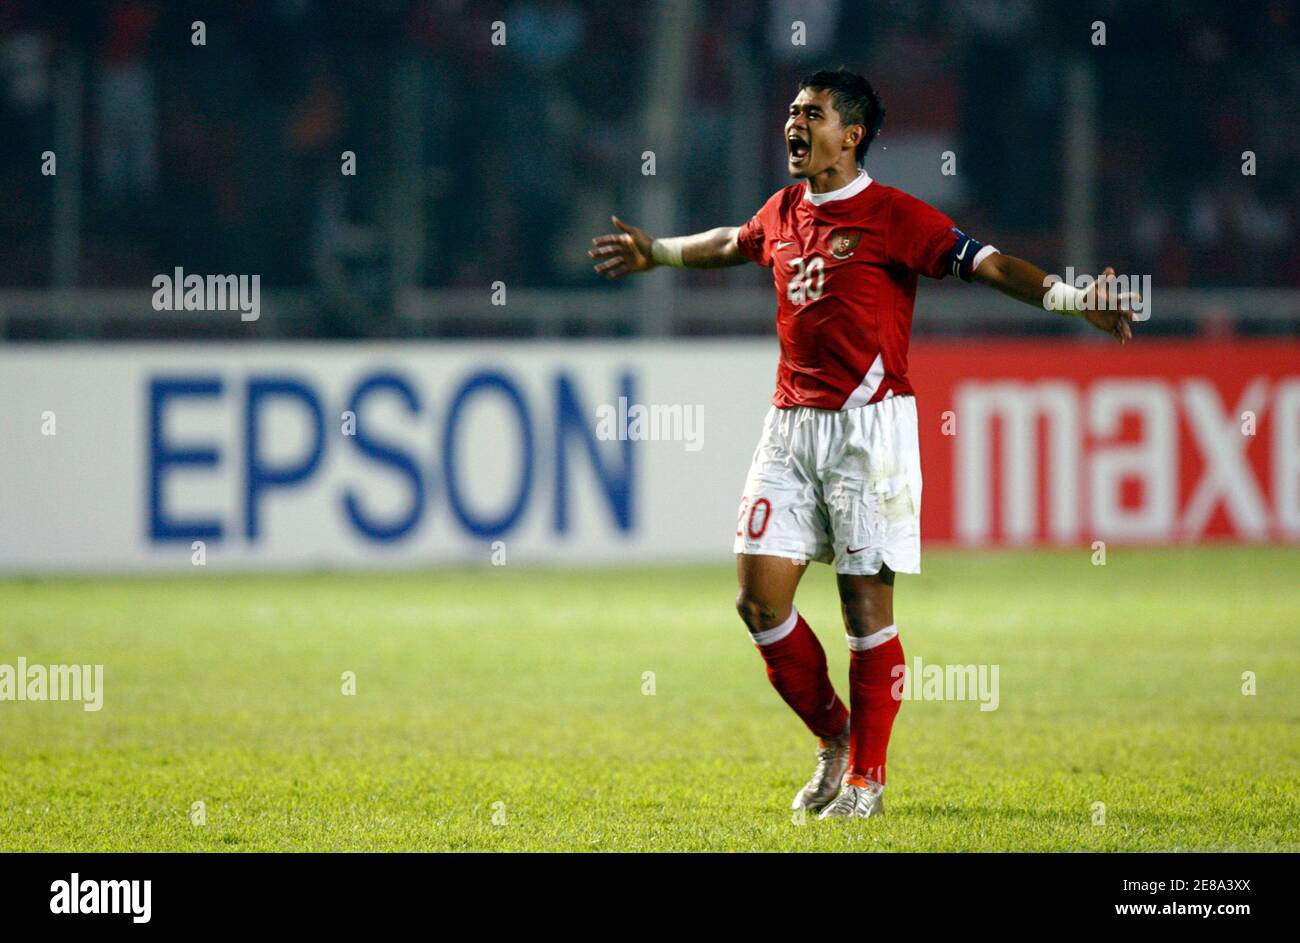 Indonesia's Bambang Pamungkas reacts after Indonesia won against Bahrain after their 2007 AFC Asian Cup Group D soccer match in Jakarta July 10, 2007. REUTERS/Beawiharta (INDONESIA) Stock Photo